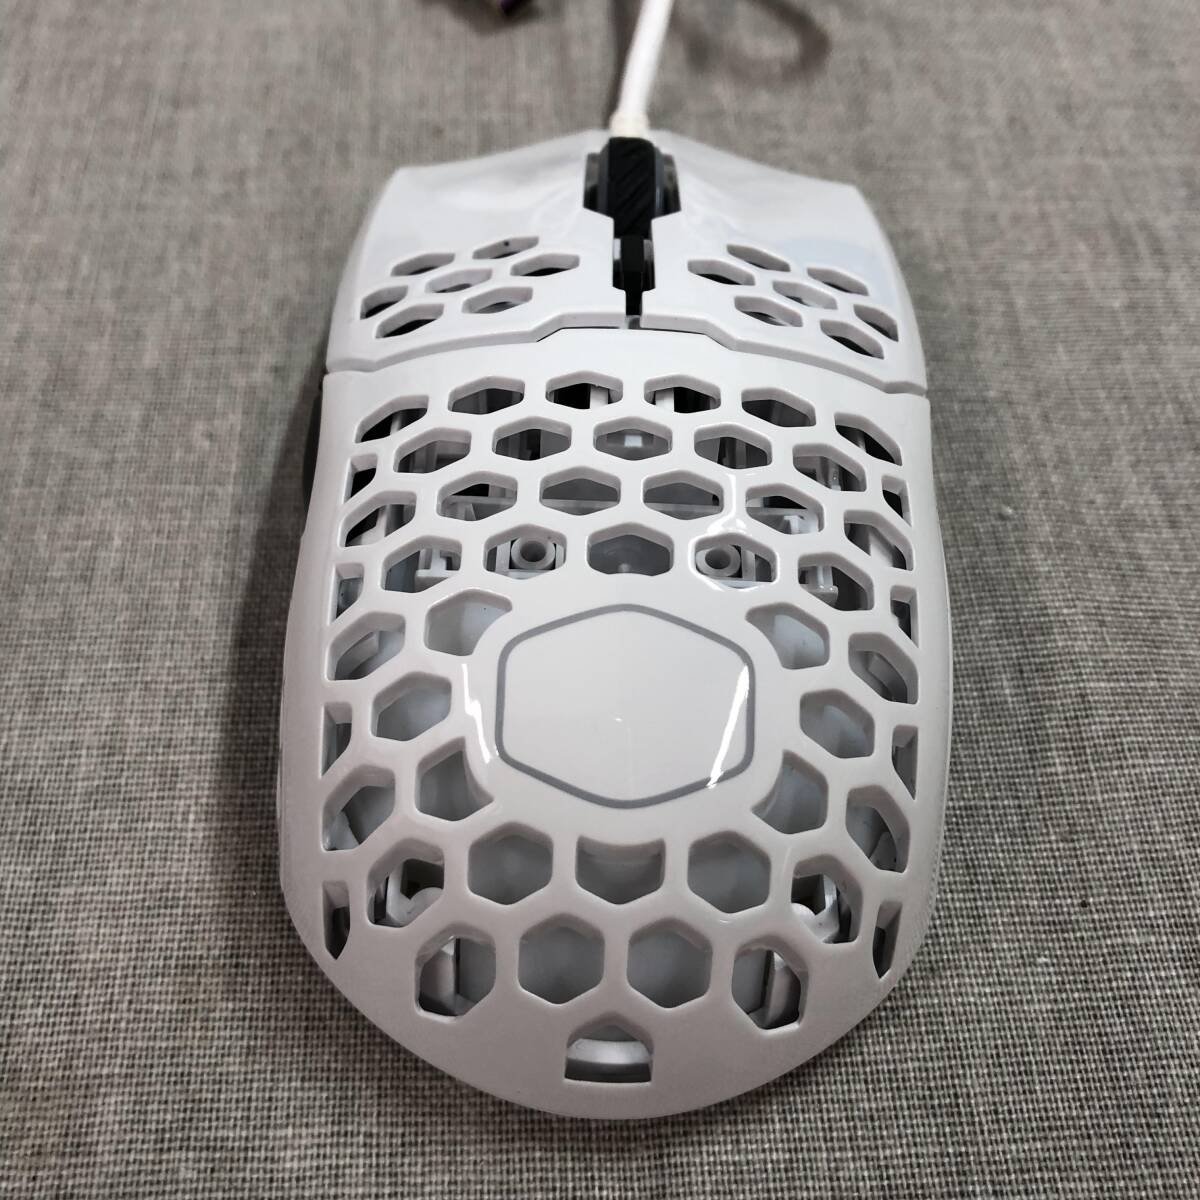 Cooler Master MasterMouse MM711 White Glossyge-ming mouse super light weight honeycomb shell adoption MM-711-WWOL2